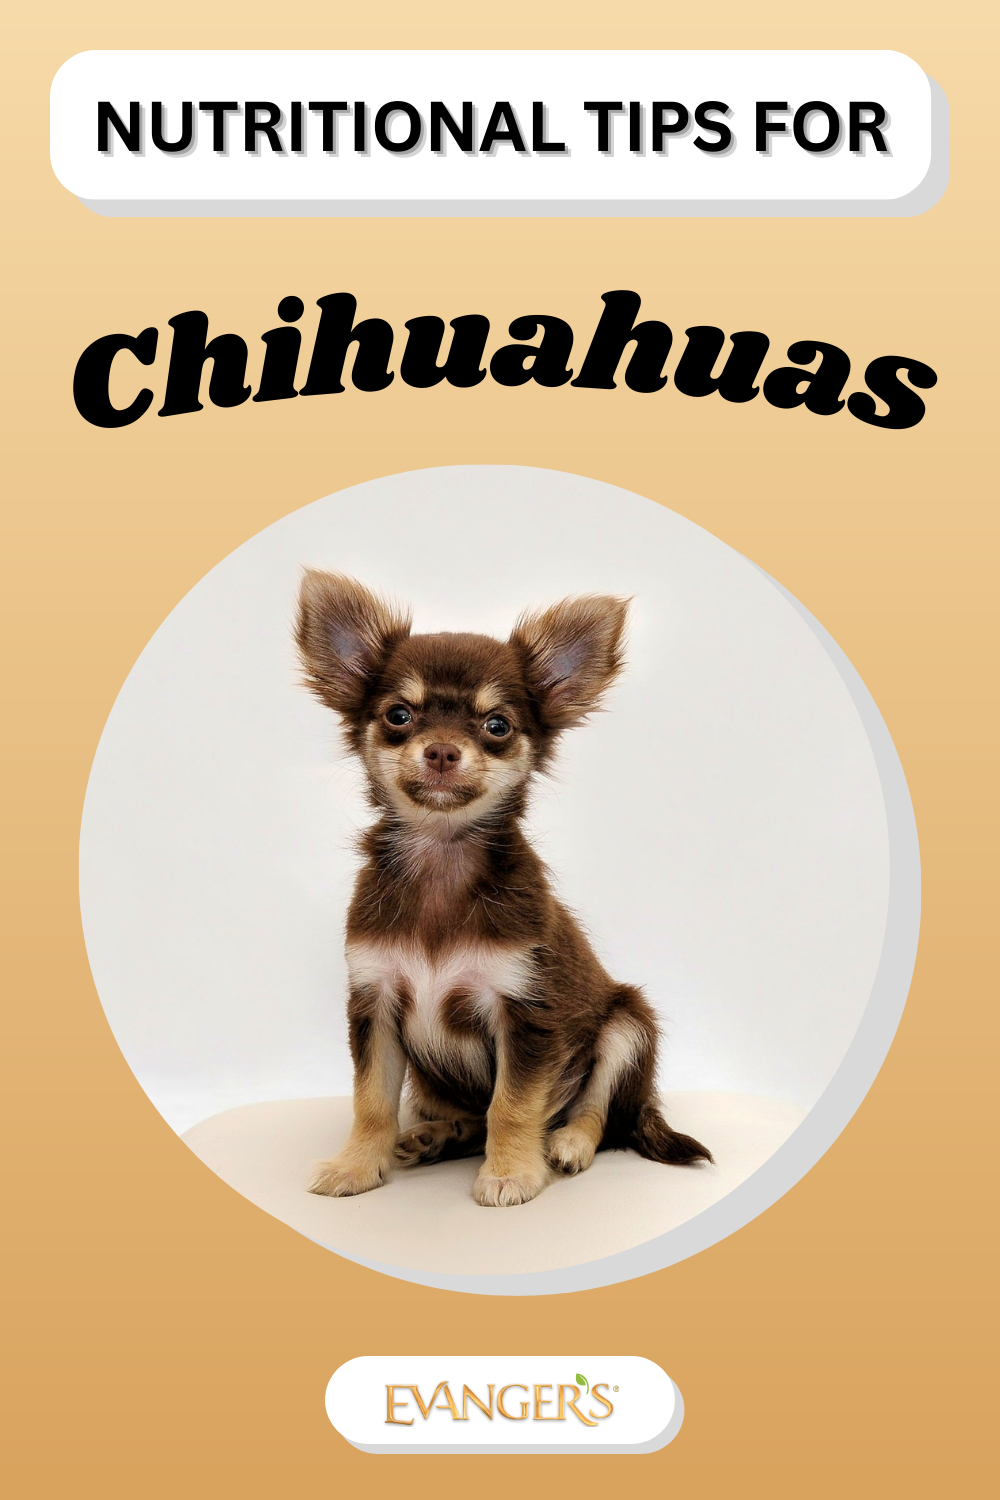 Nutritional Tips for Chihuahuas